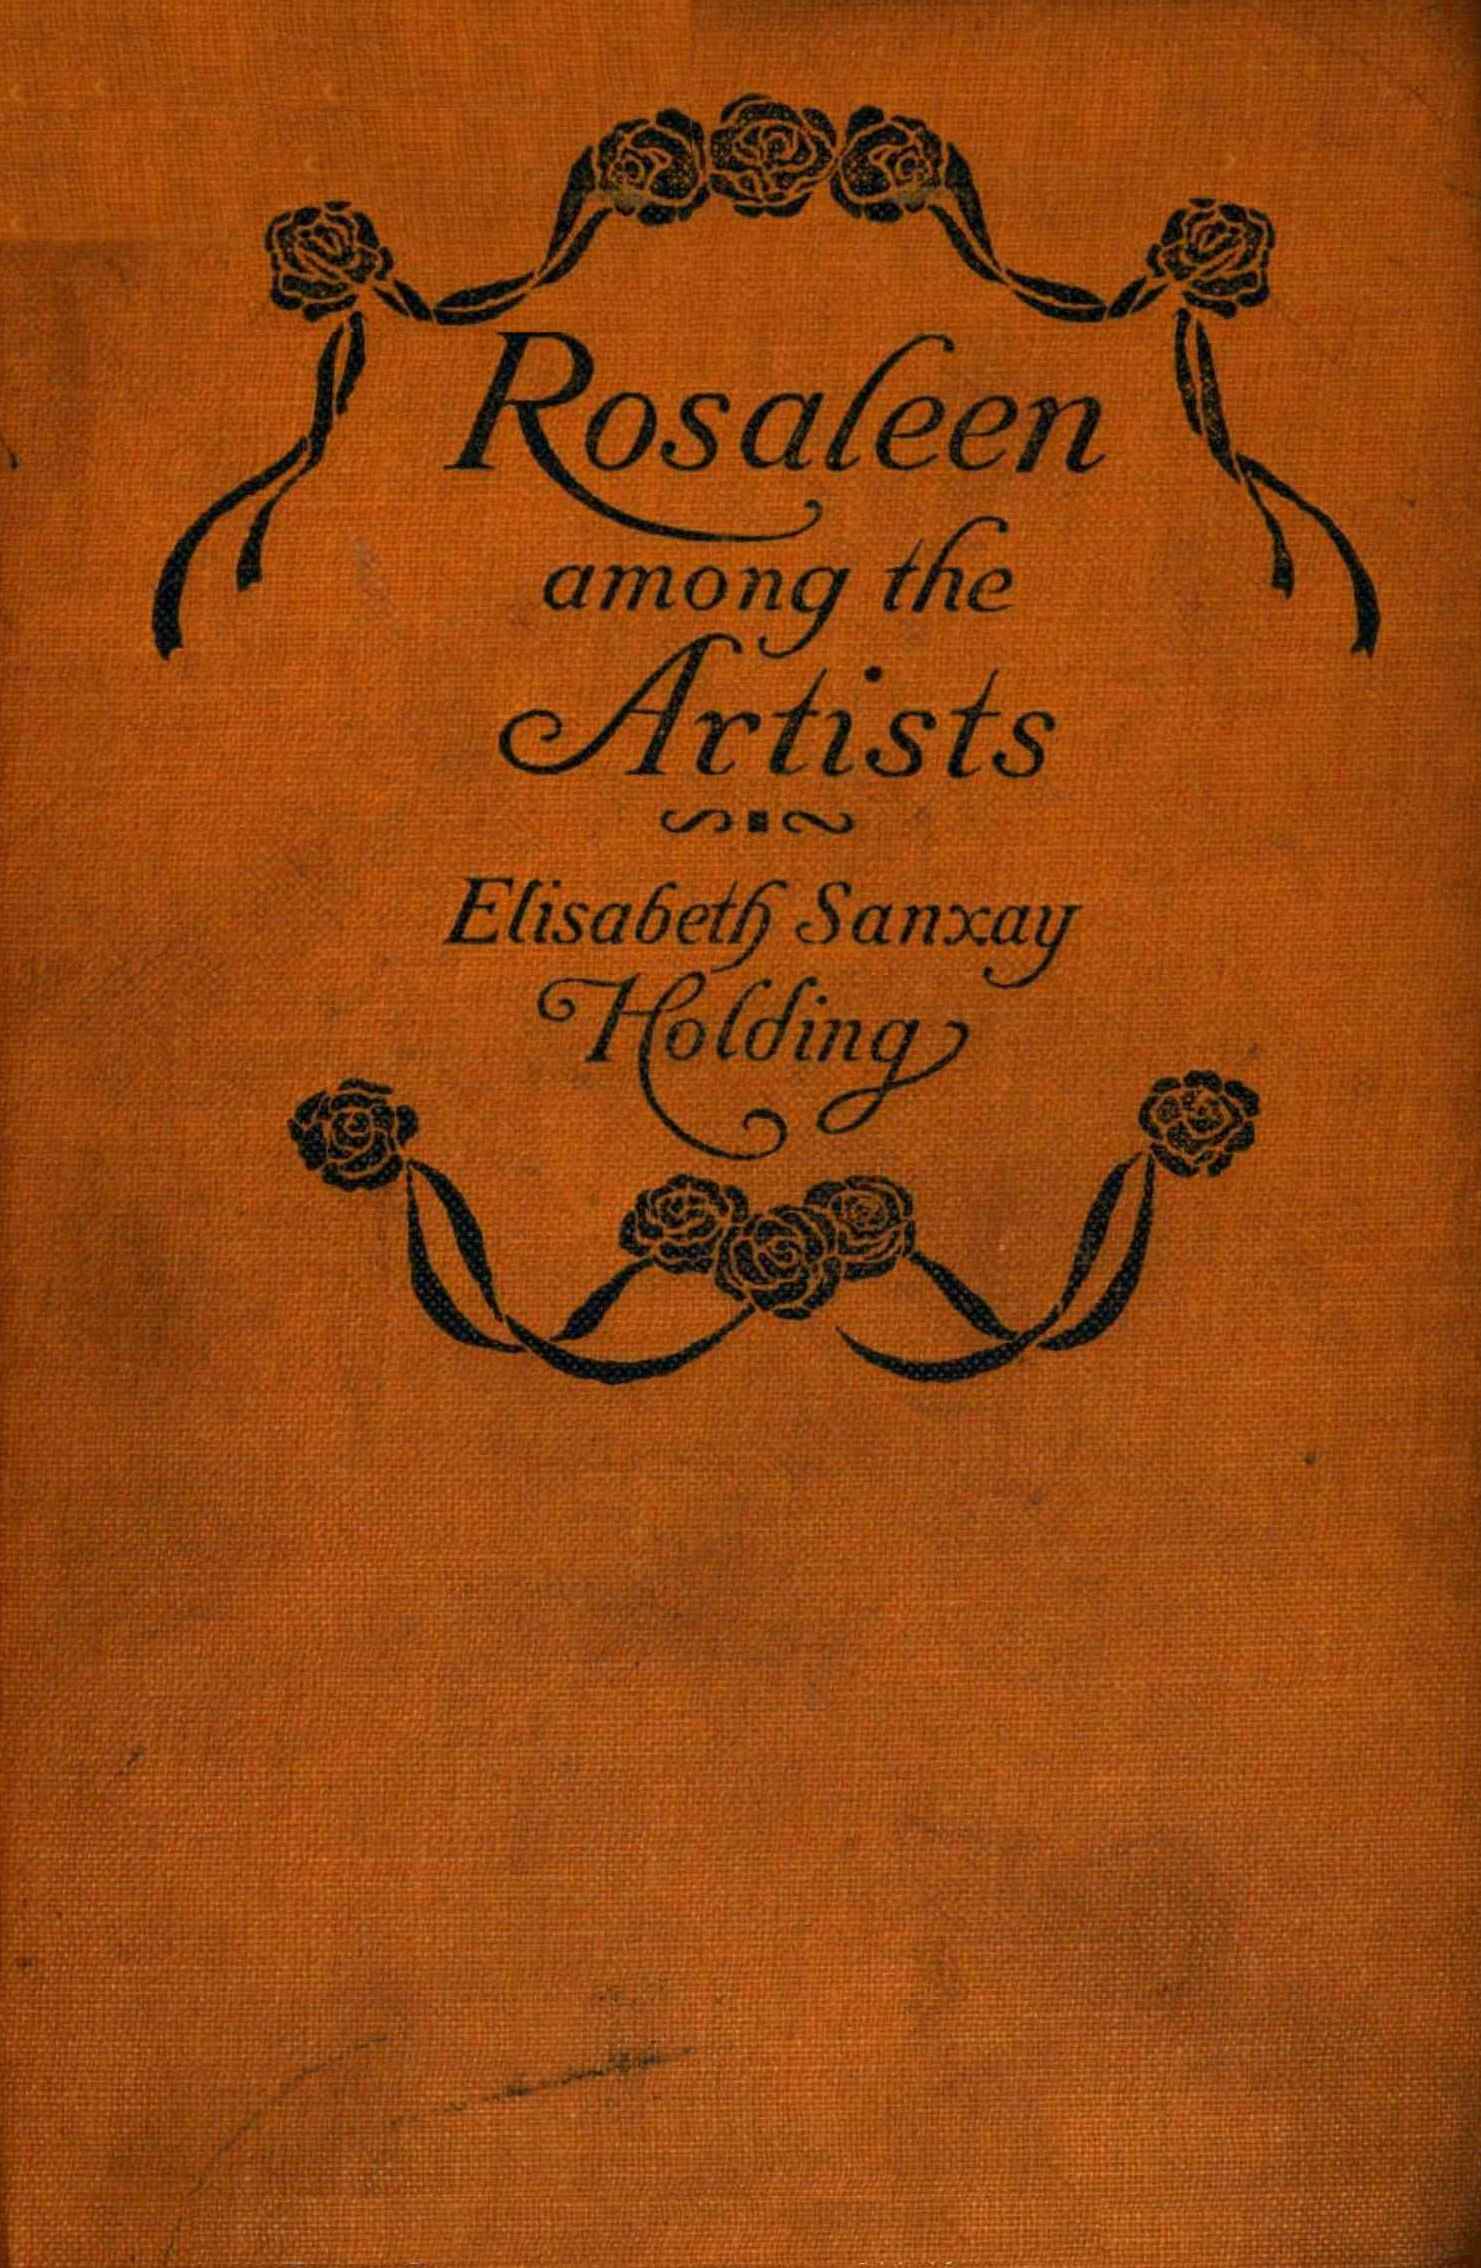 The Project Gutenberg eBook of Rosaleen among the artists, by Elisabeth Sanxay Holding.